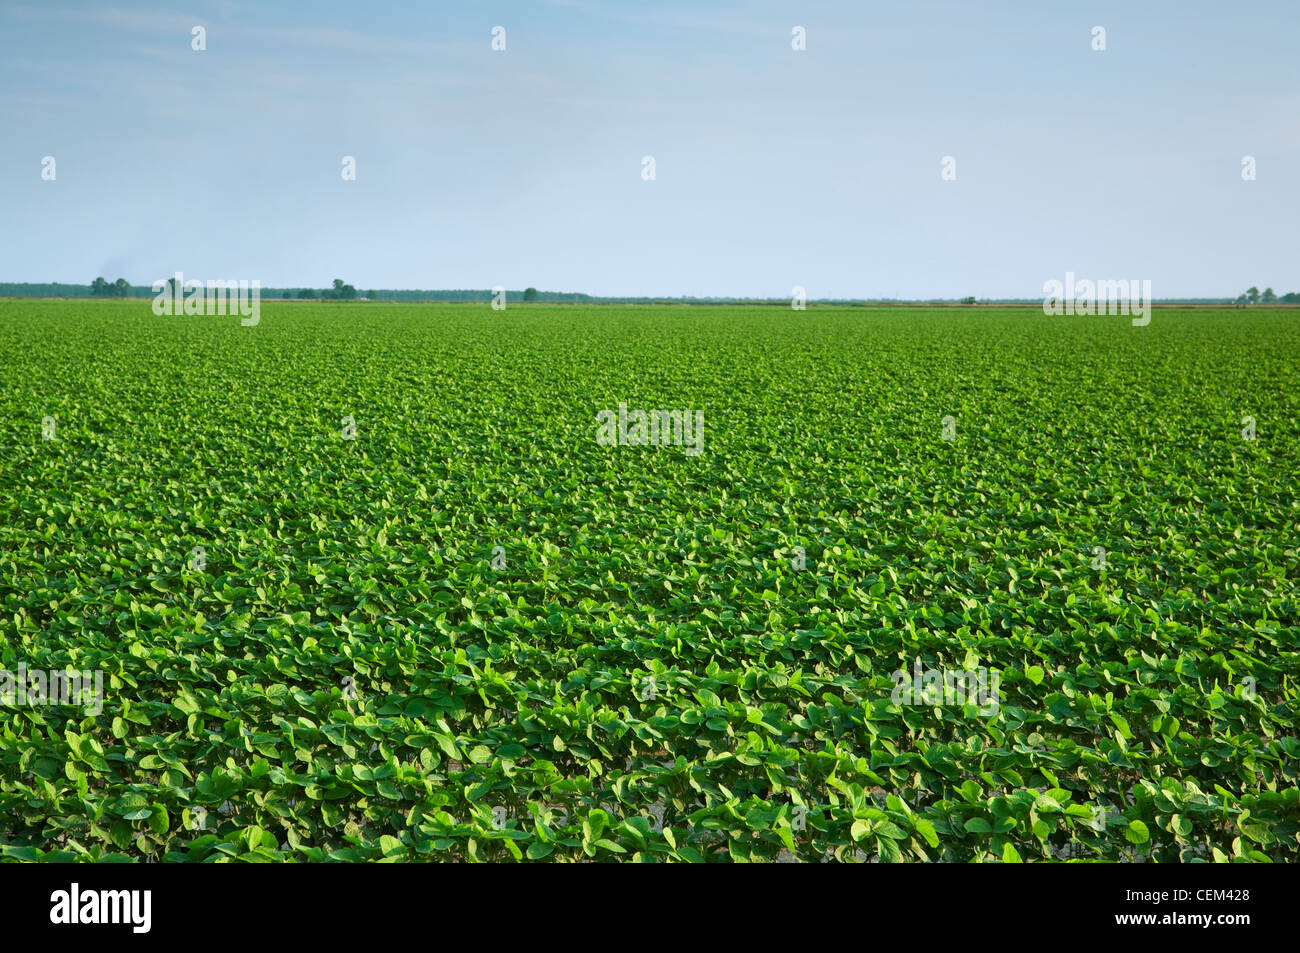 Agriculture - Large field of early growth soybean plants at approximately the 8th trifoliate stage / near England, Arkansas, USA Stock Photo